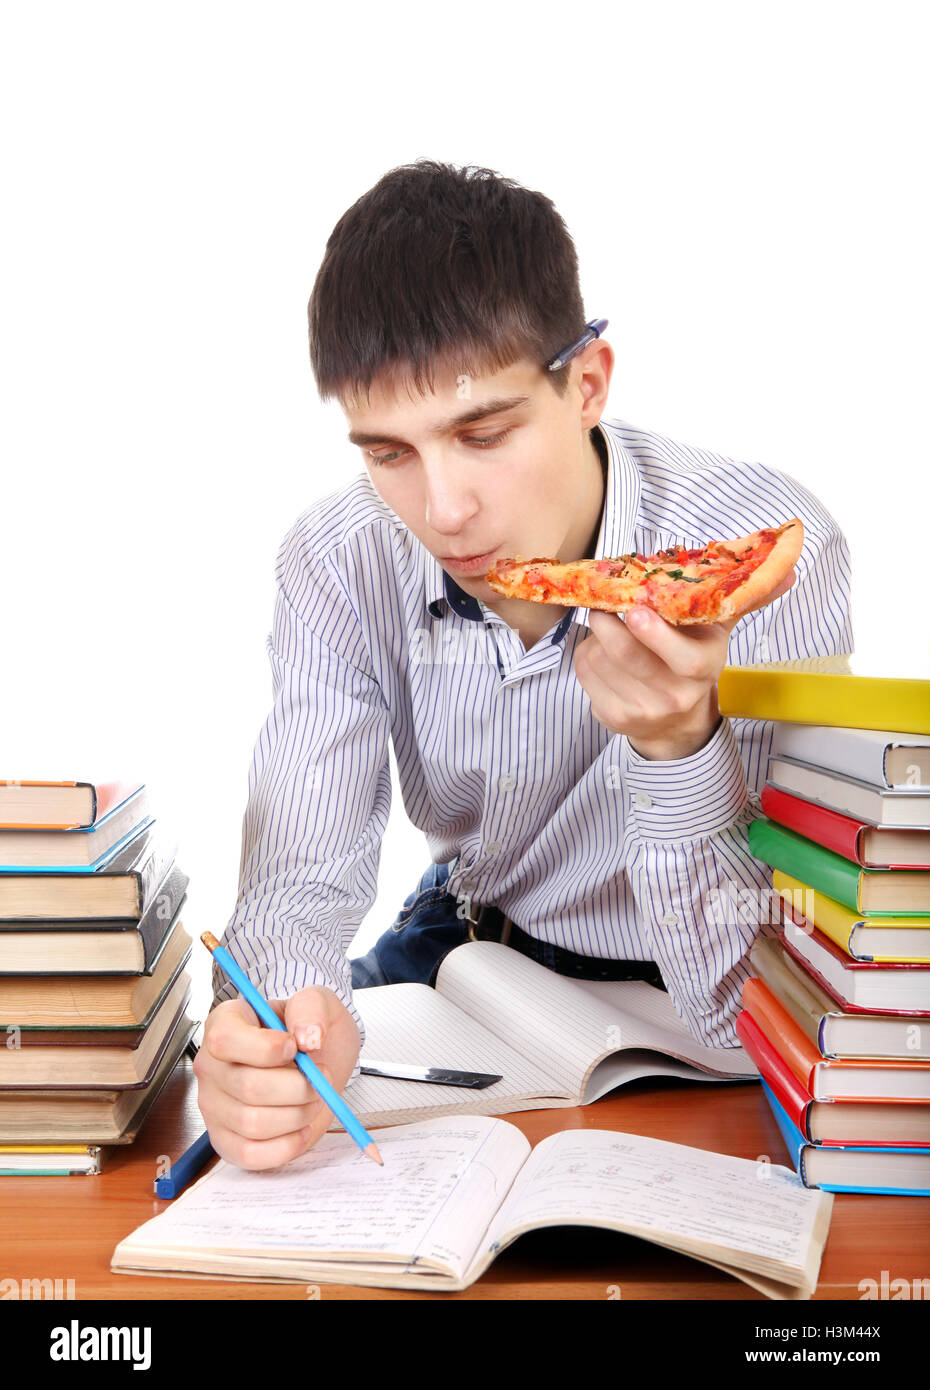 Student with a Pizza Stock Photo